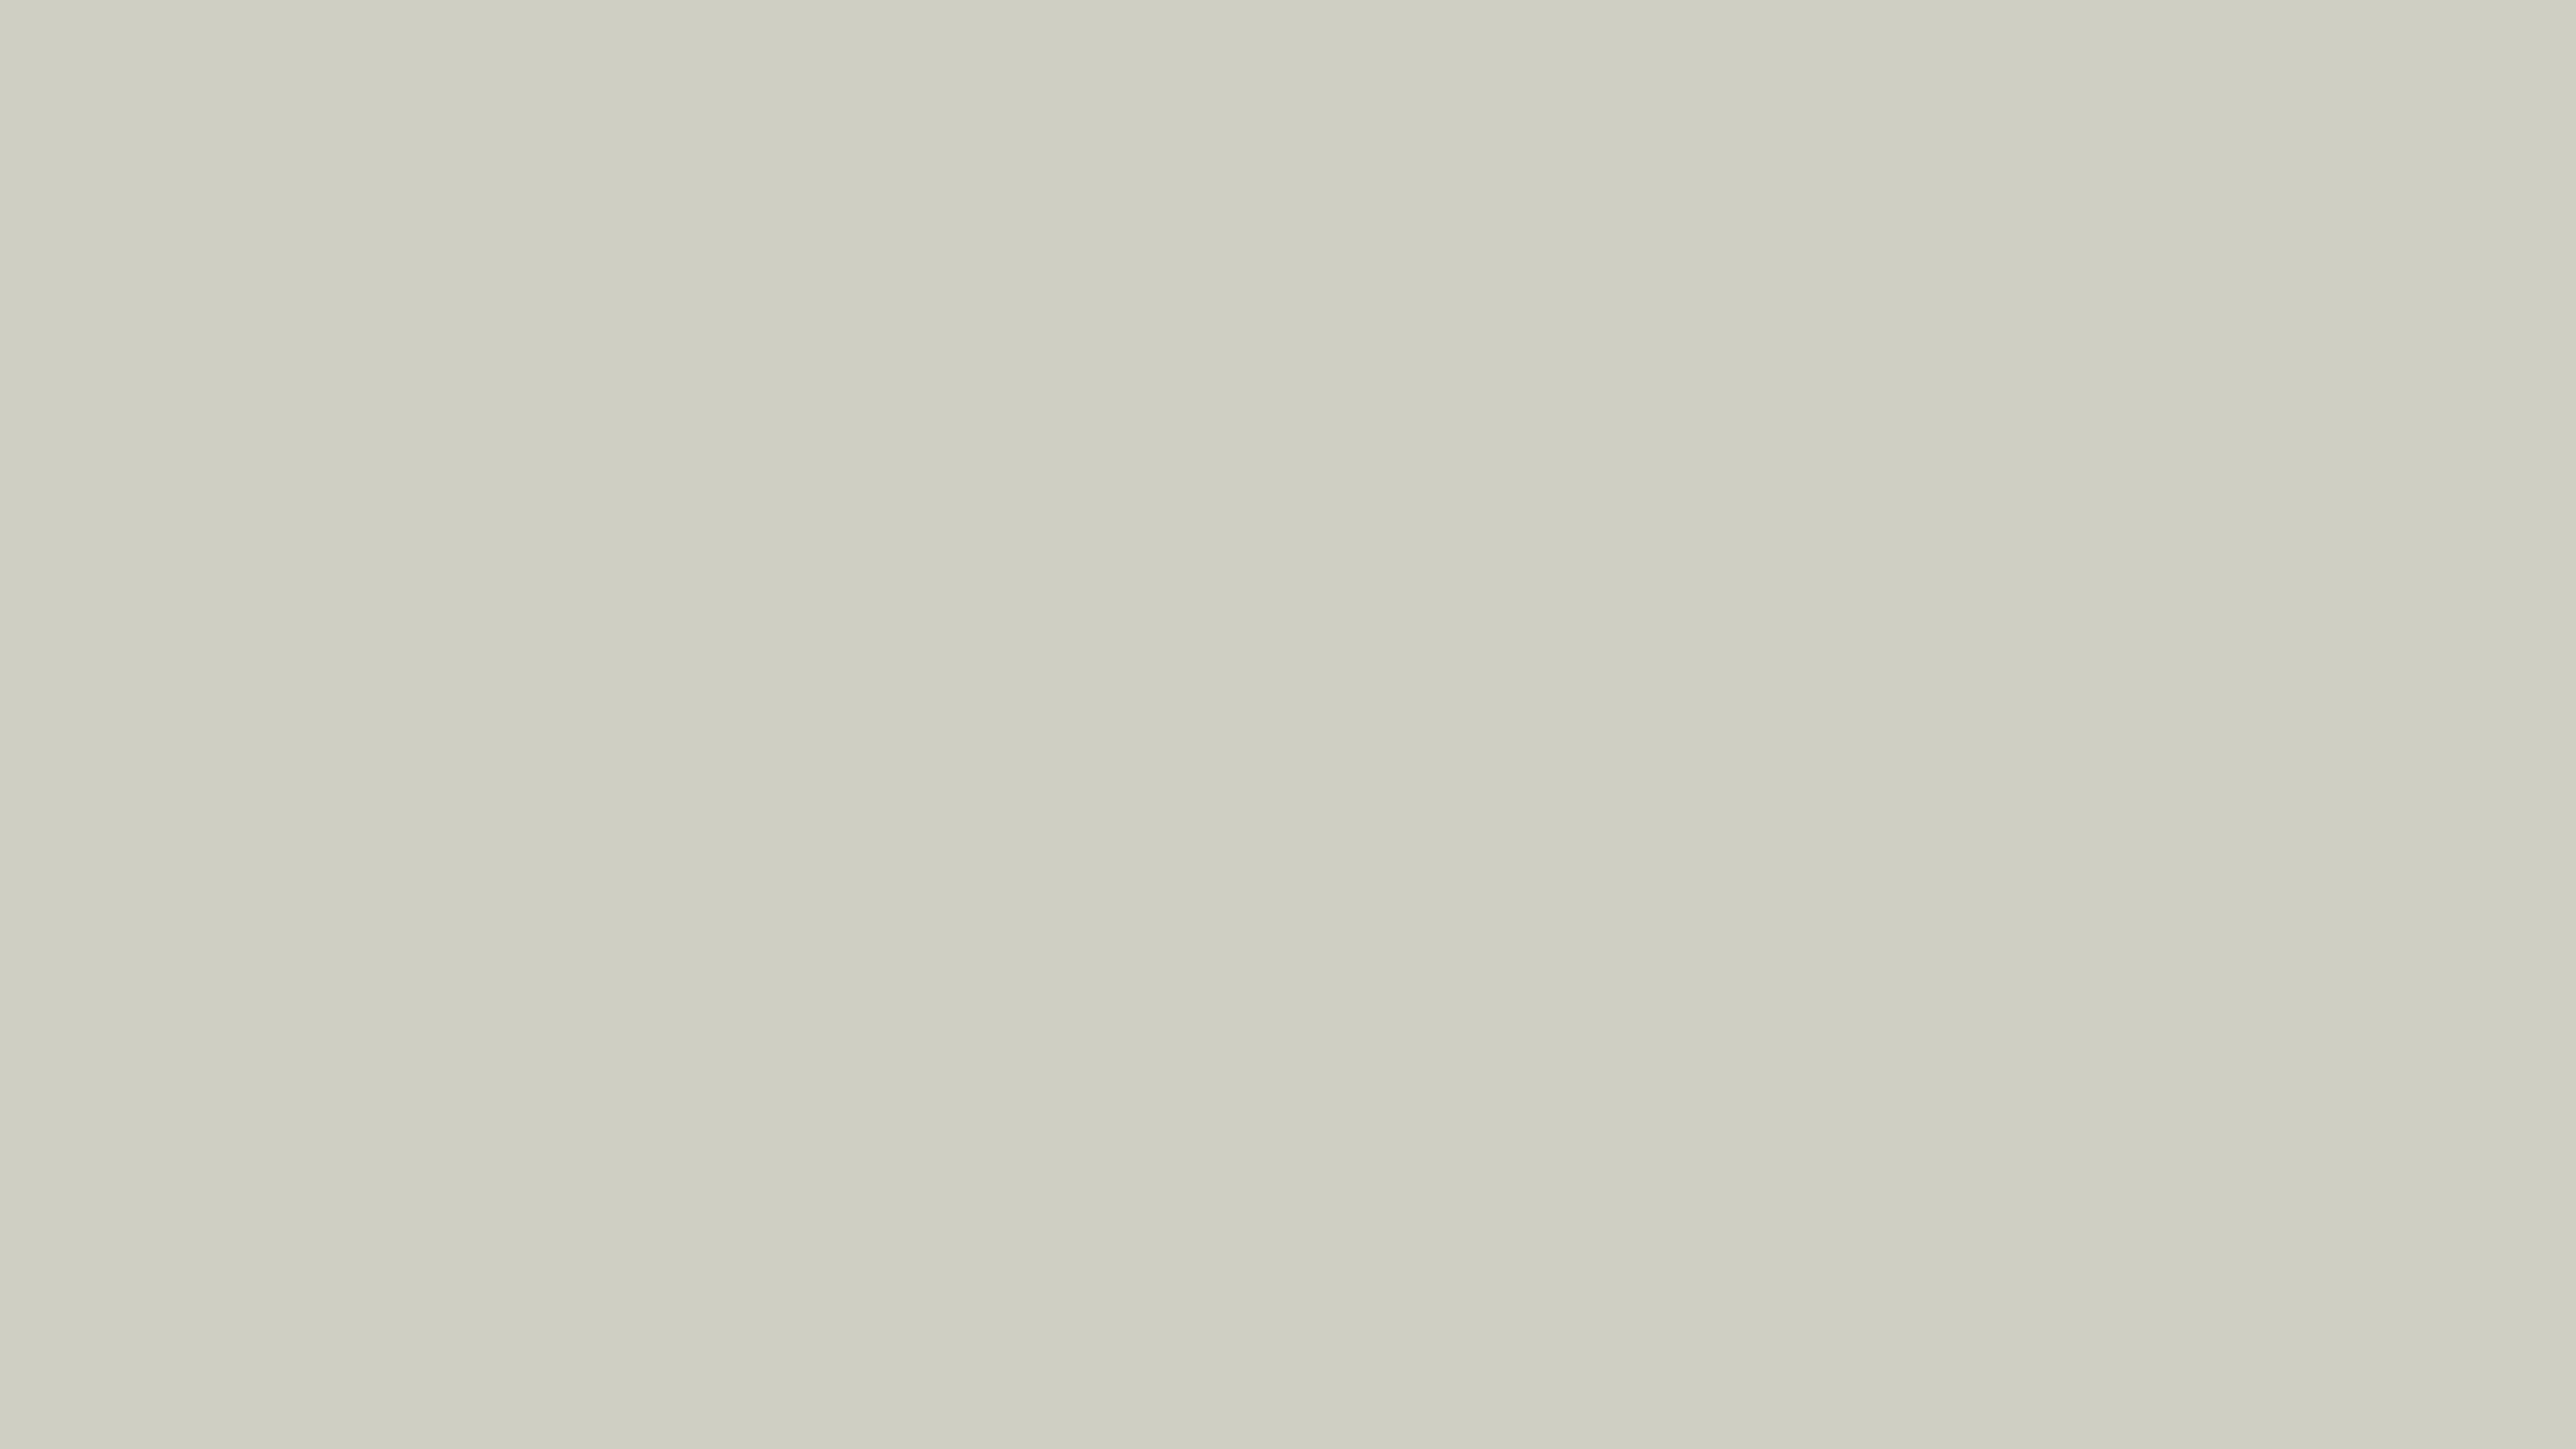 4096x2304 Pastel Gray Solid Color Background